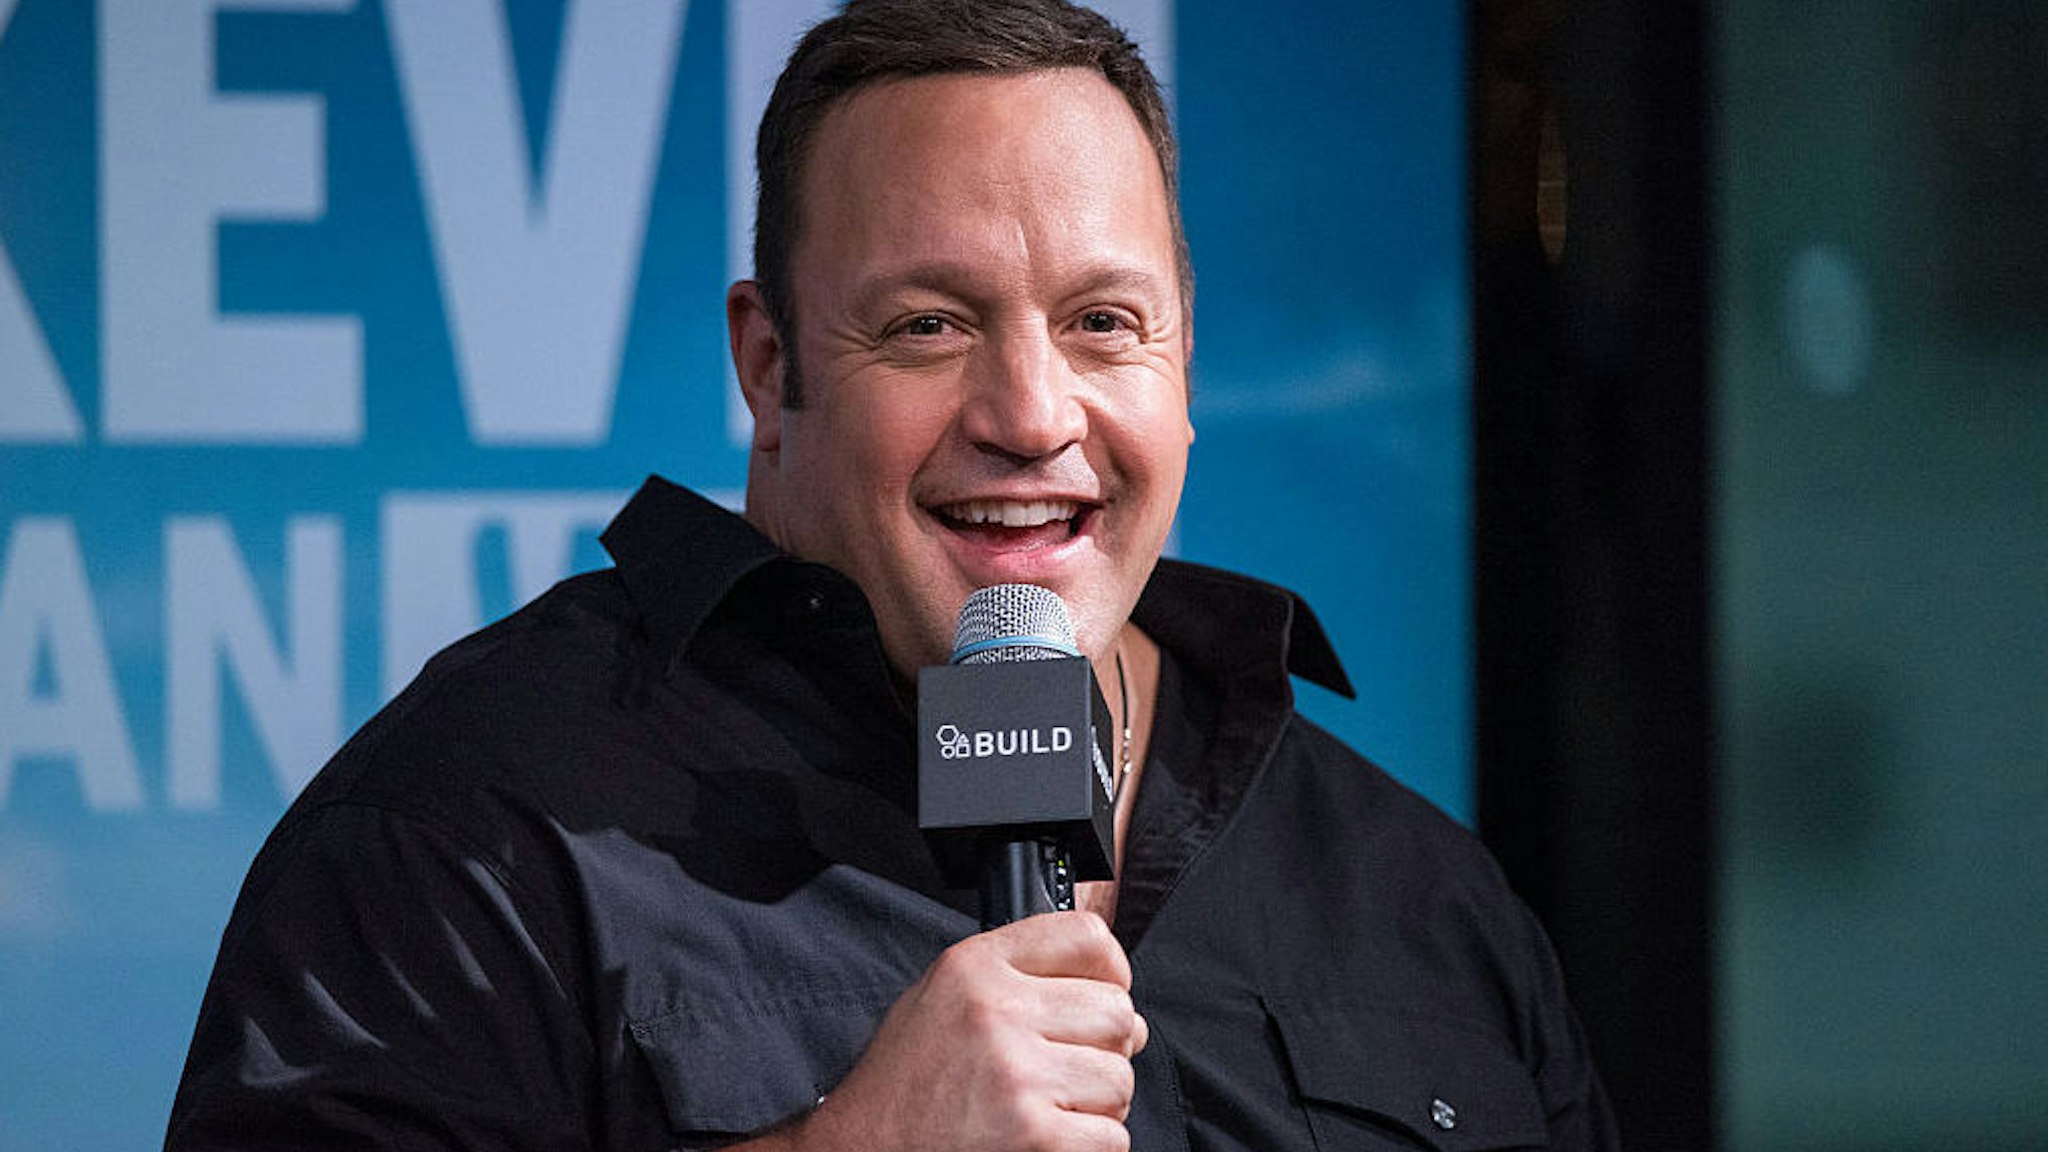 Actor Kevin James discussing "Kevin Can Wait" during AOL Build at AOL HQ on September 19, 2016 in New York City.